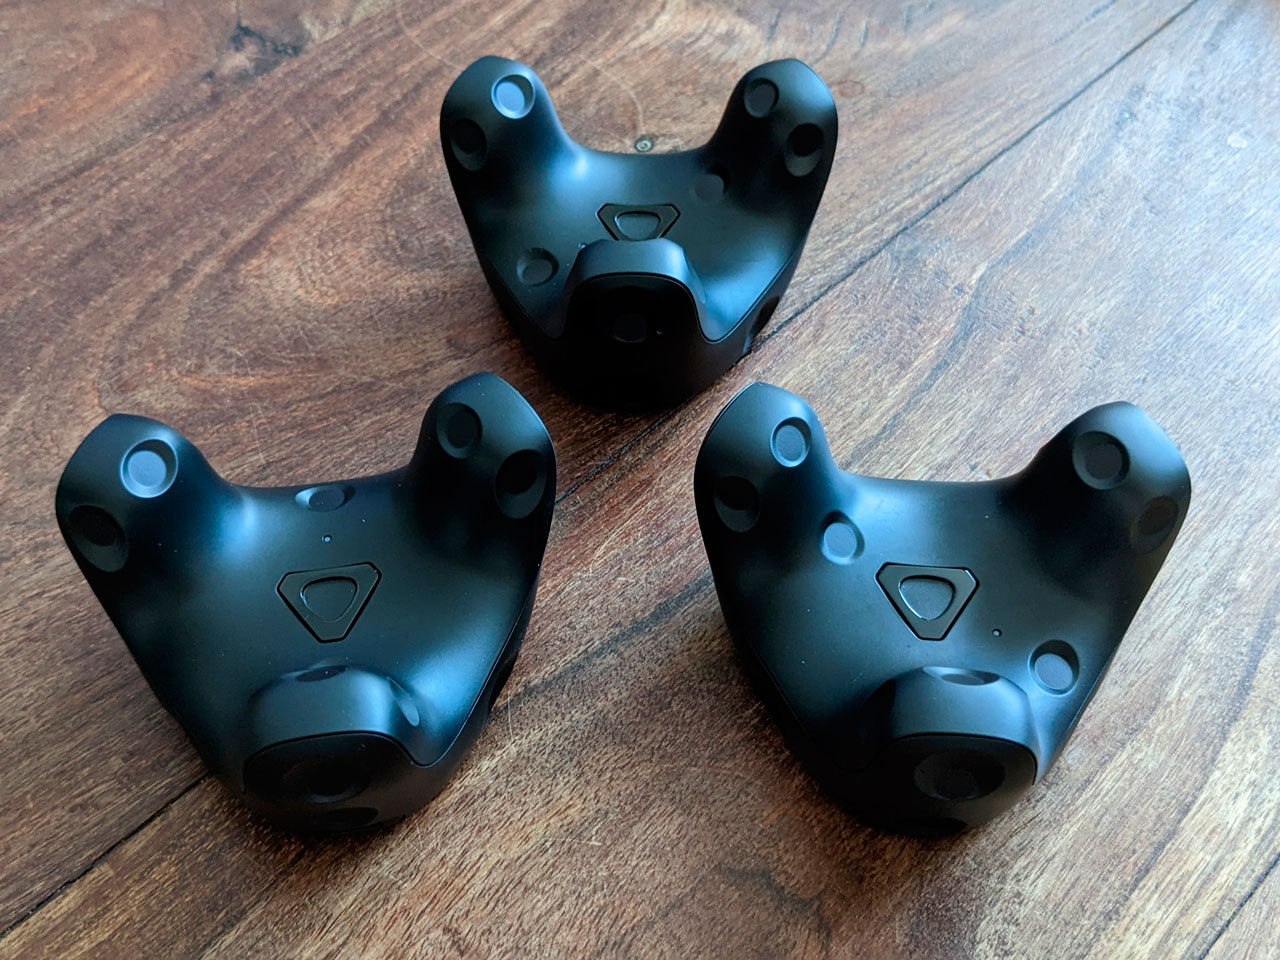 htc vive trackers